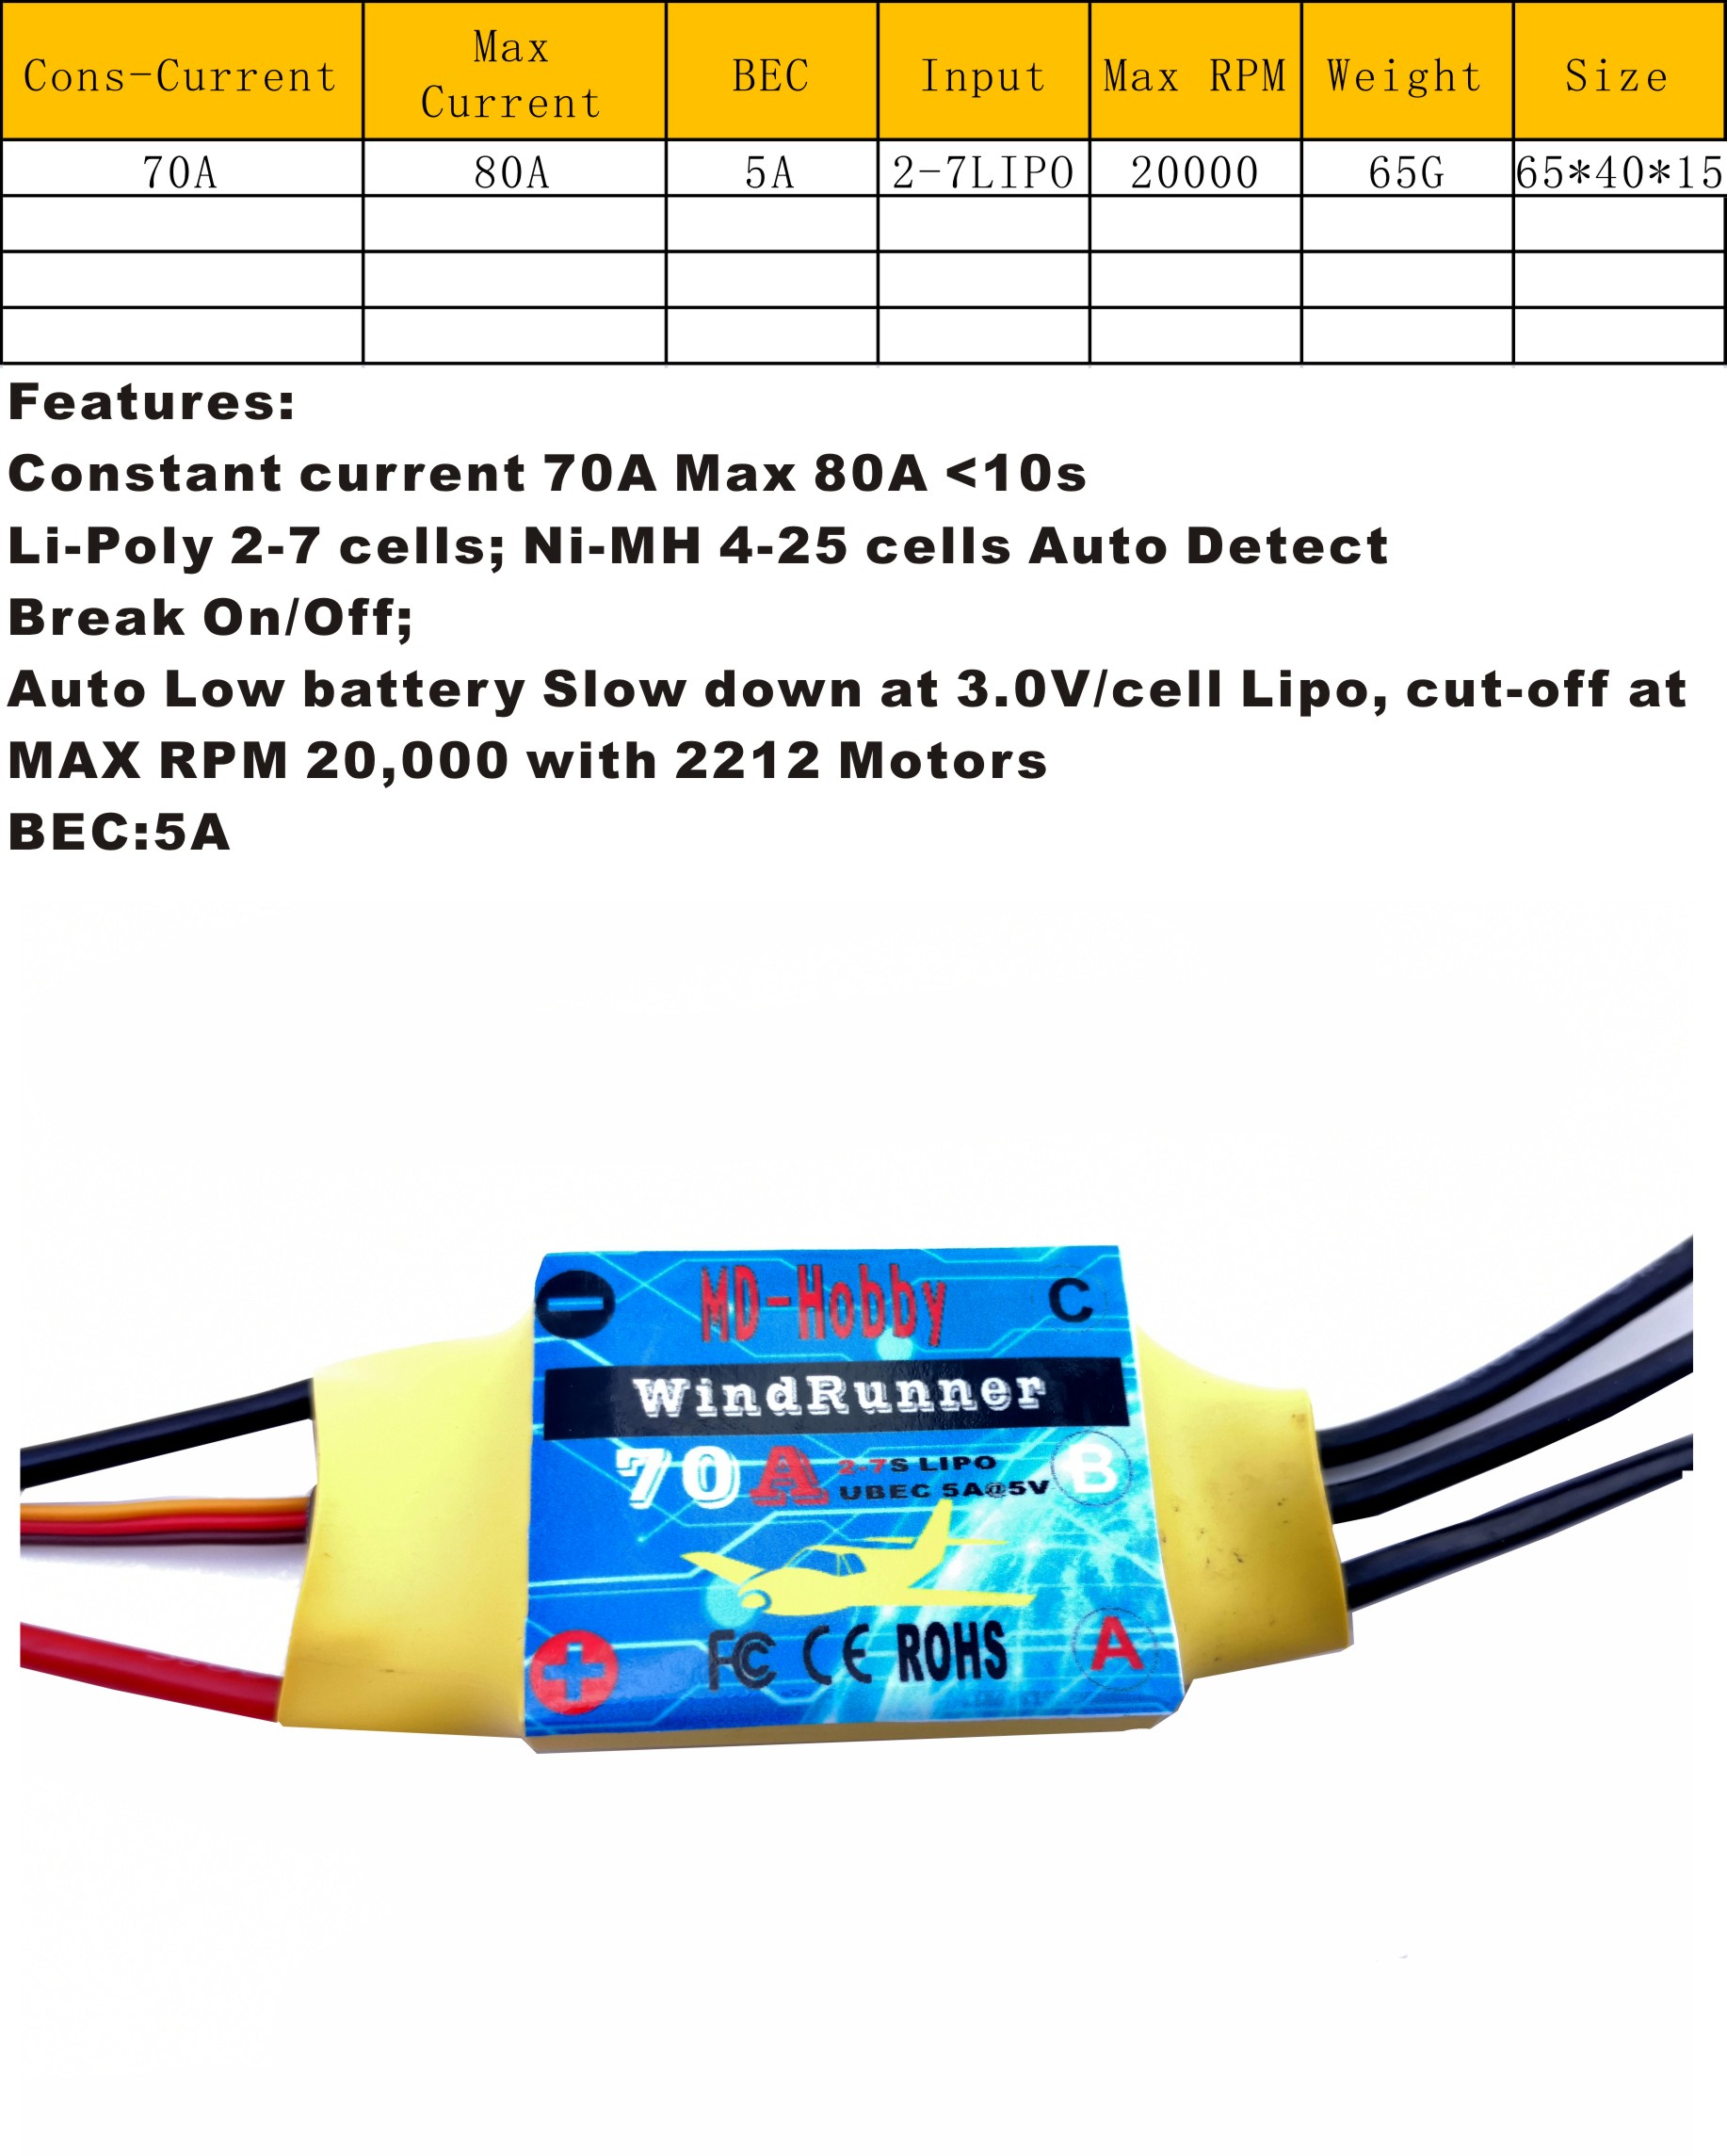 Windrunner RC ESC 70A 50A 40A 30A 20A 10A Support 2212 Brushless Motor 3A/5A BEC Break 2s-7s for RC Fixed Wing - Photo: 2